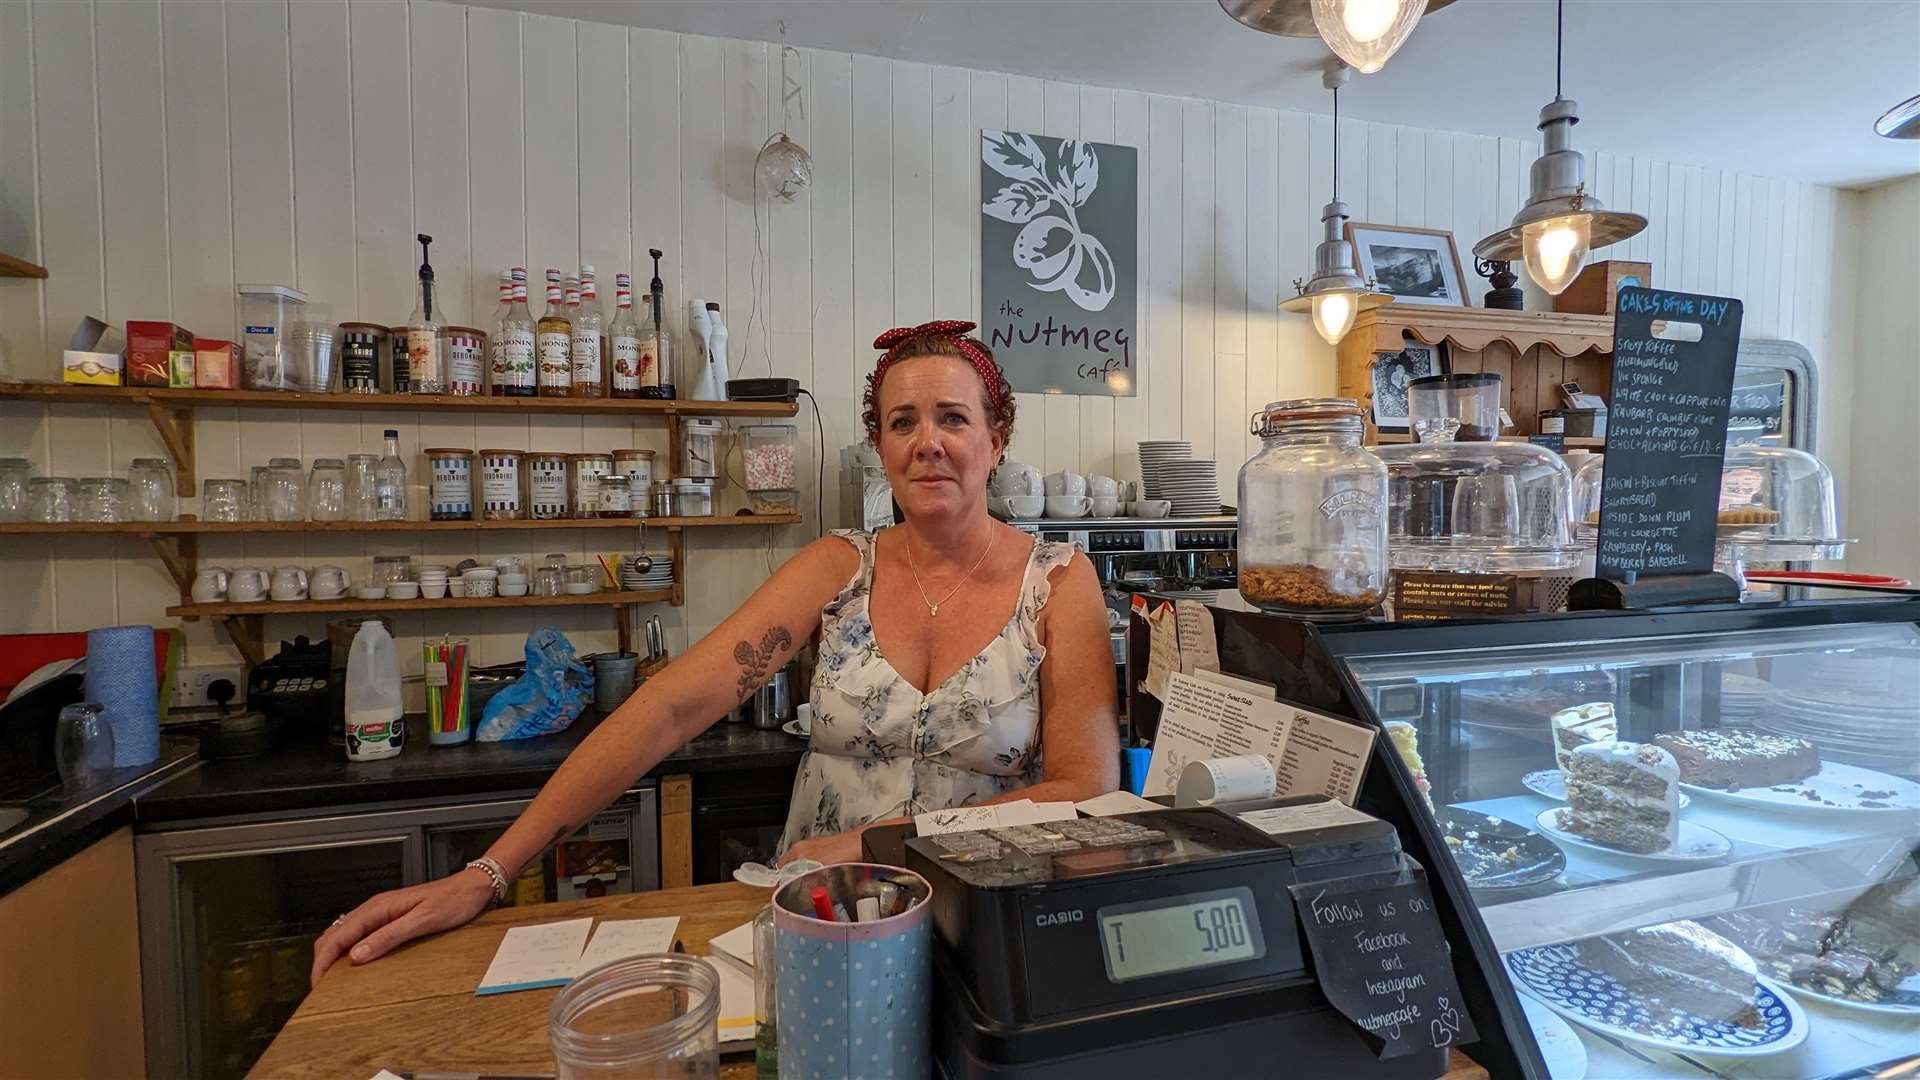 Nicola Robinson says her cafe in Hythe inevitably uses a lot of electricity